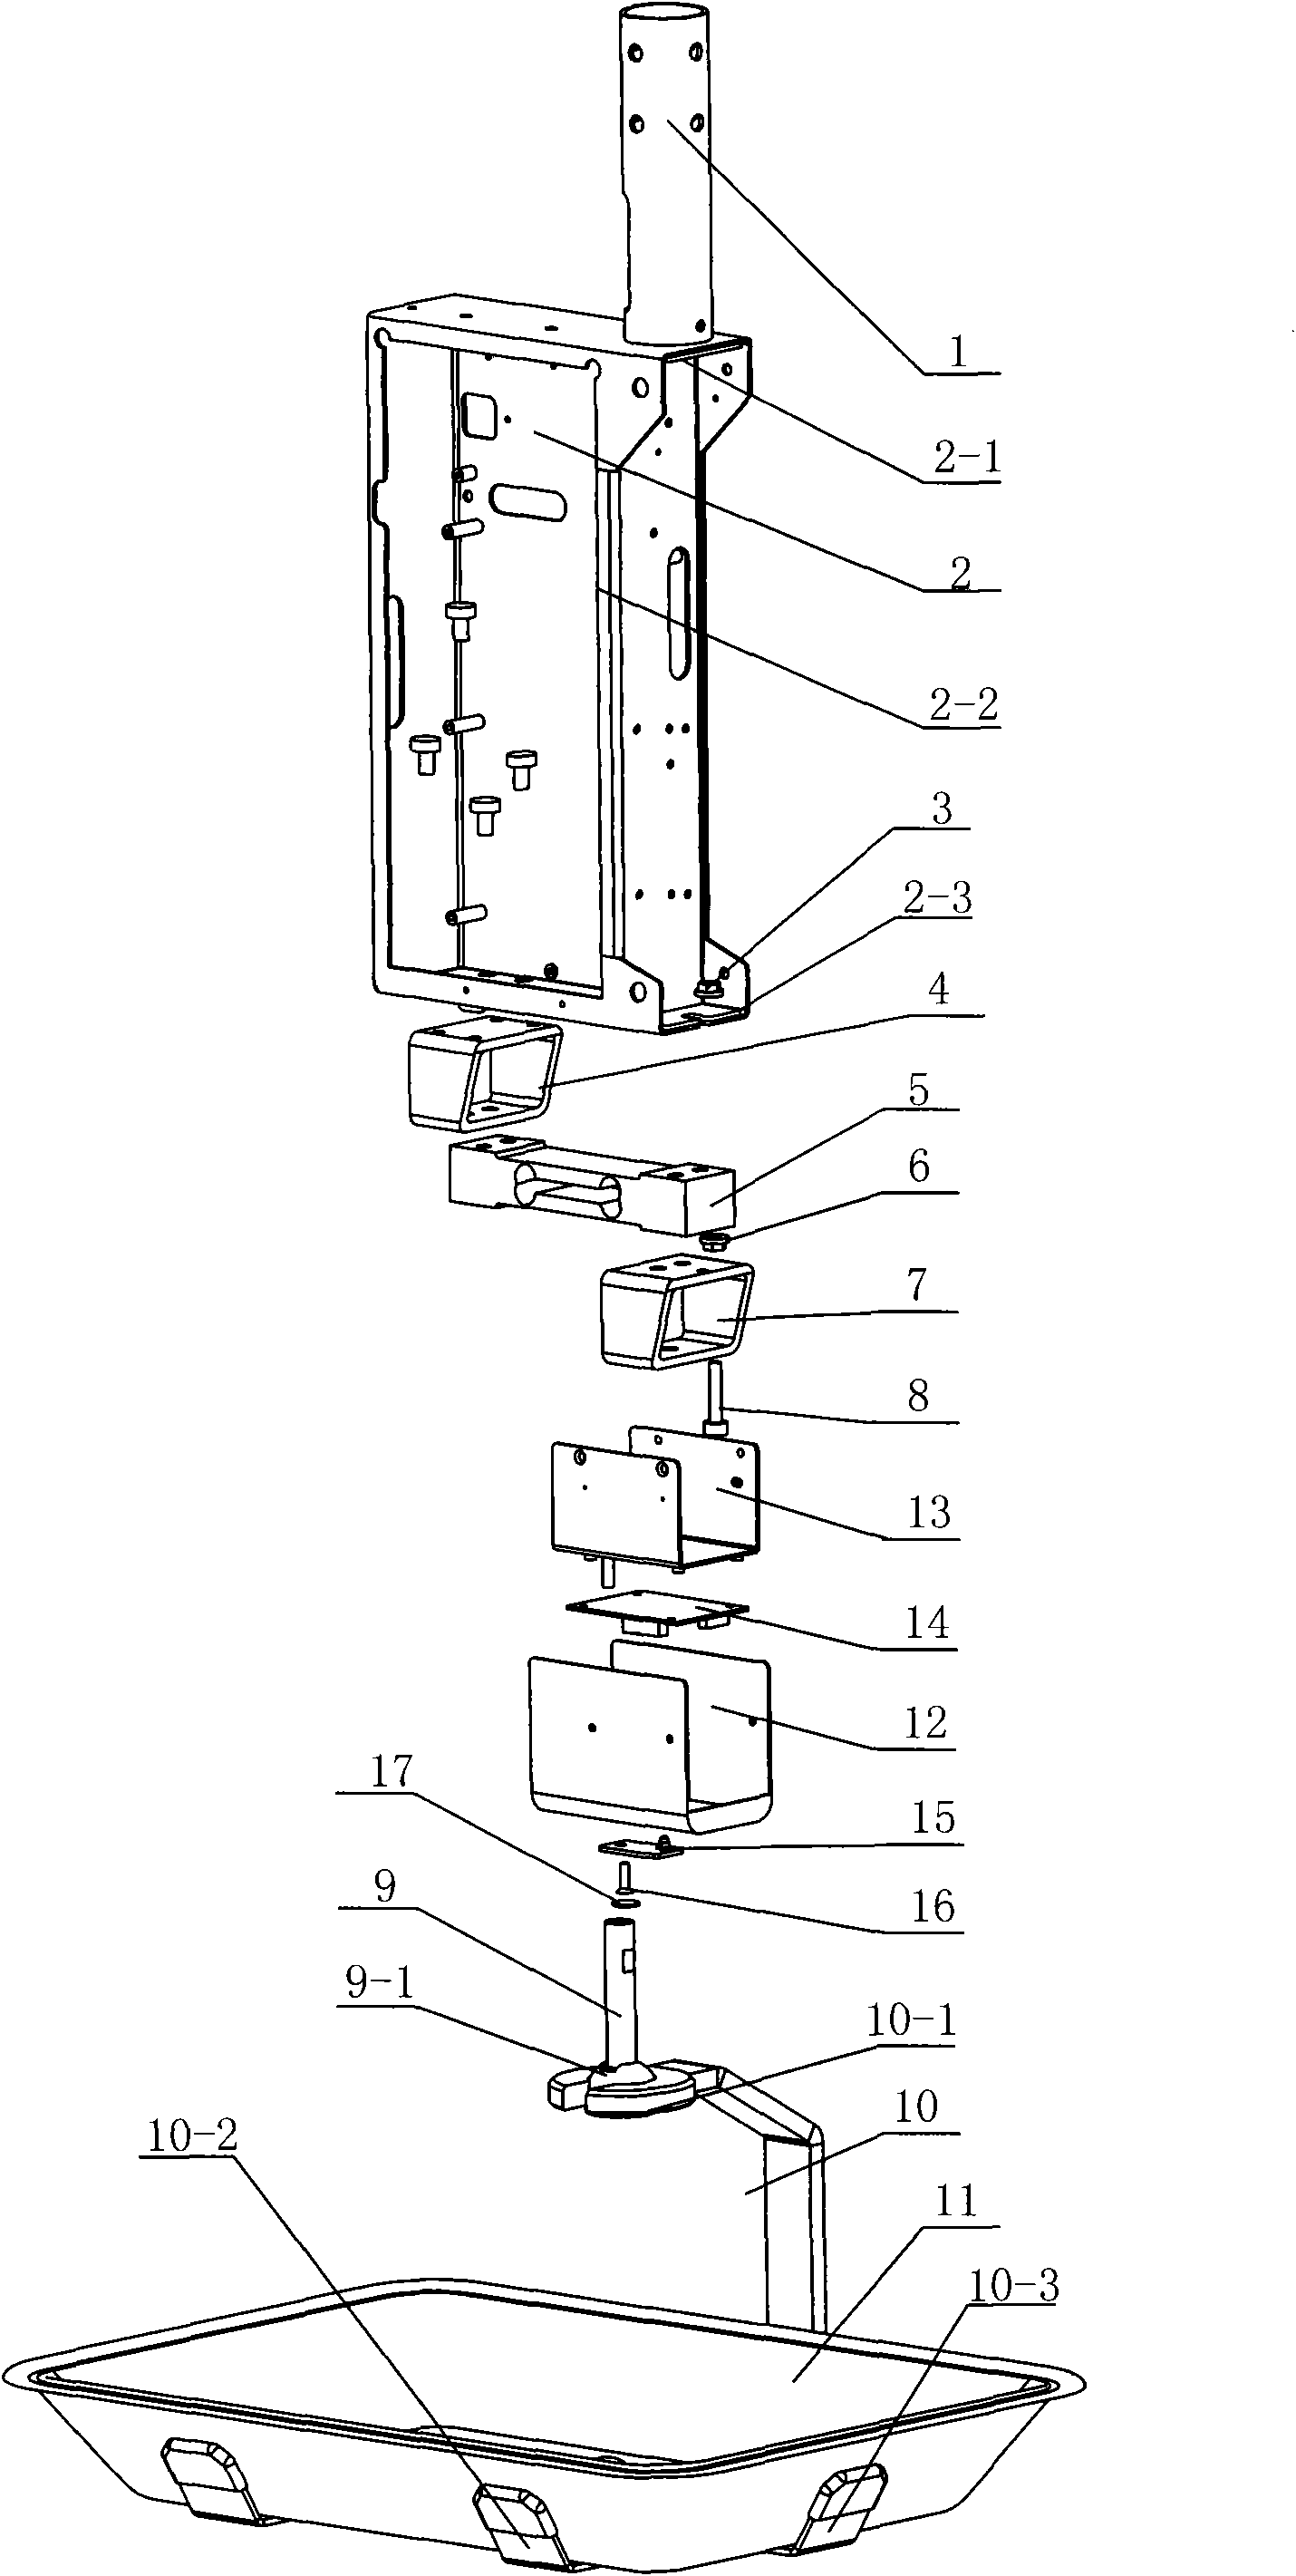 Weighing force transmission mechanism of hanging scale